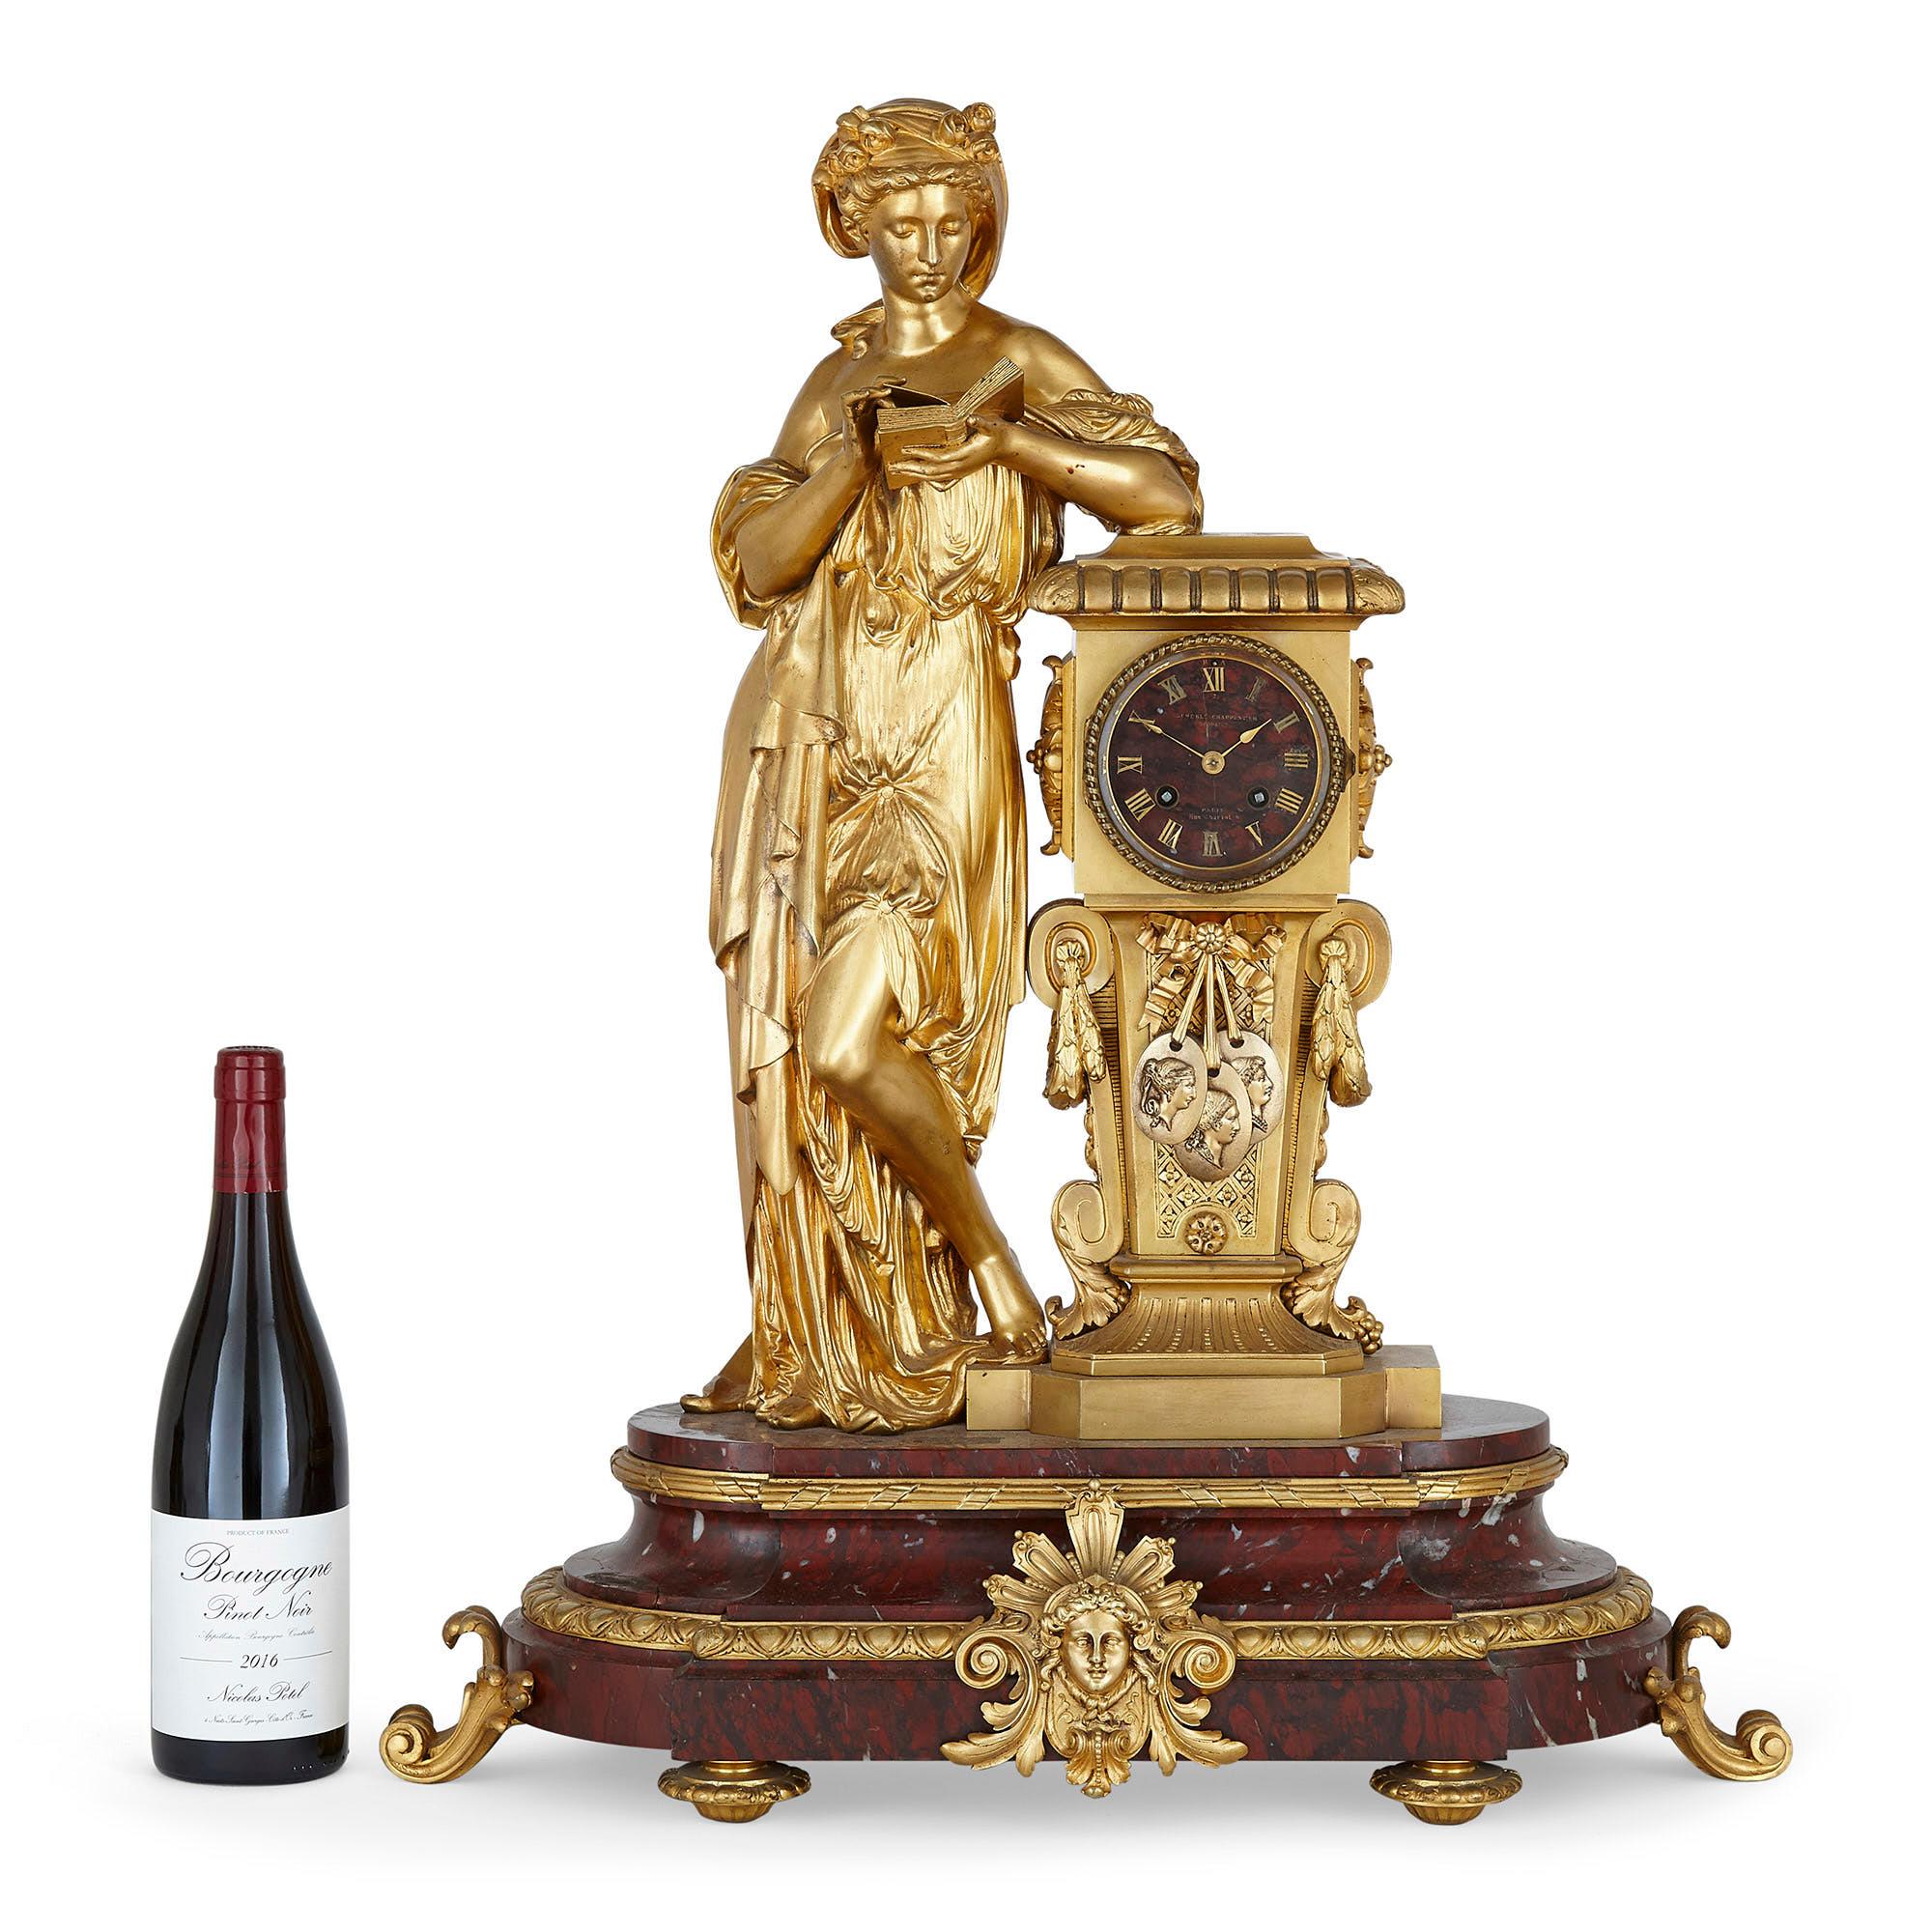 French red marble and gilt bronze Neoclassical style matched clock set
French, late 19th Century
Clock: Height 70cm, width 57cm, depth 23cm
Candelabra: Height 70cm, width 31cm, depth 24cm

This elegant three-piece matched clock set features a